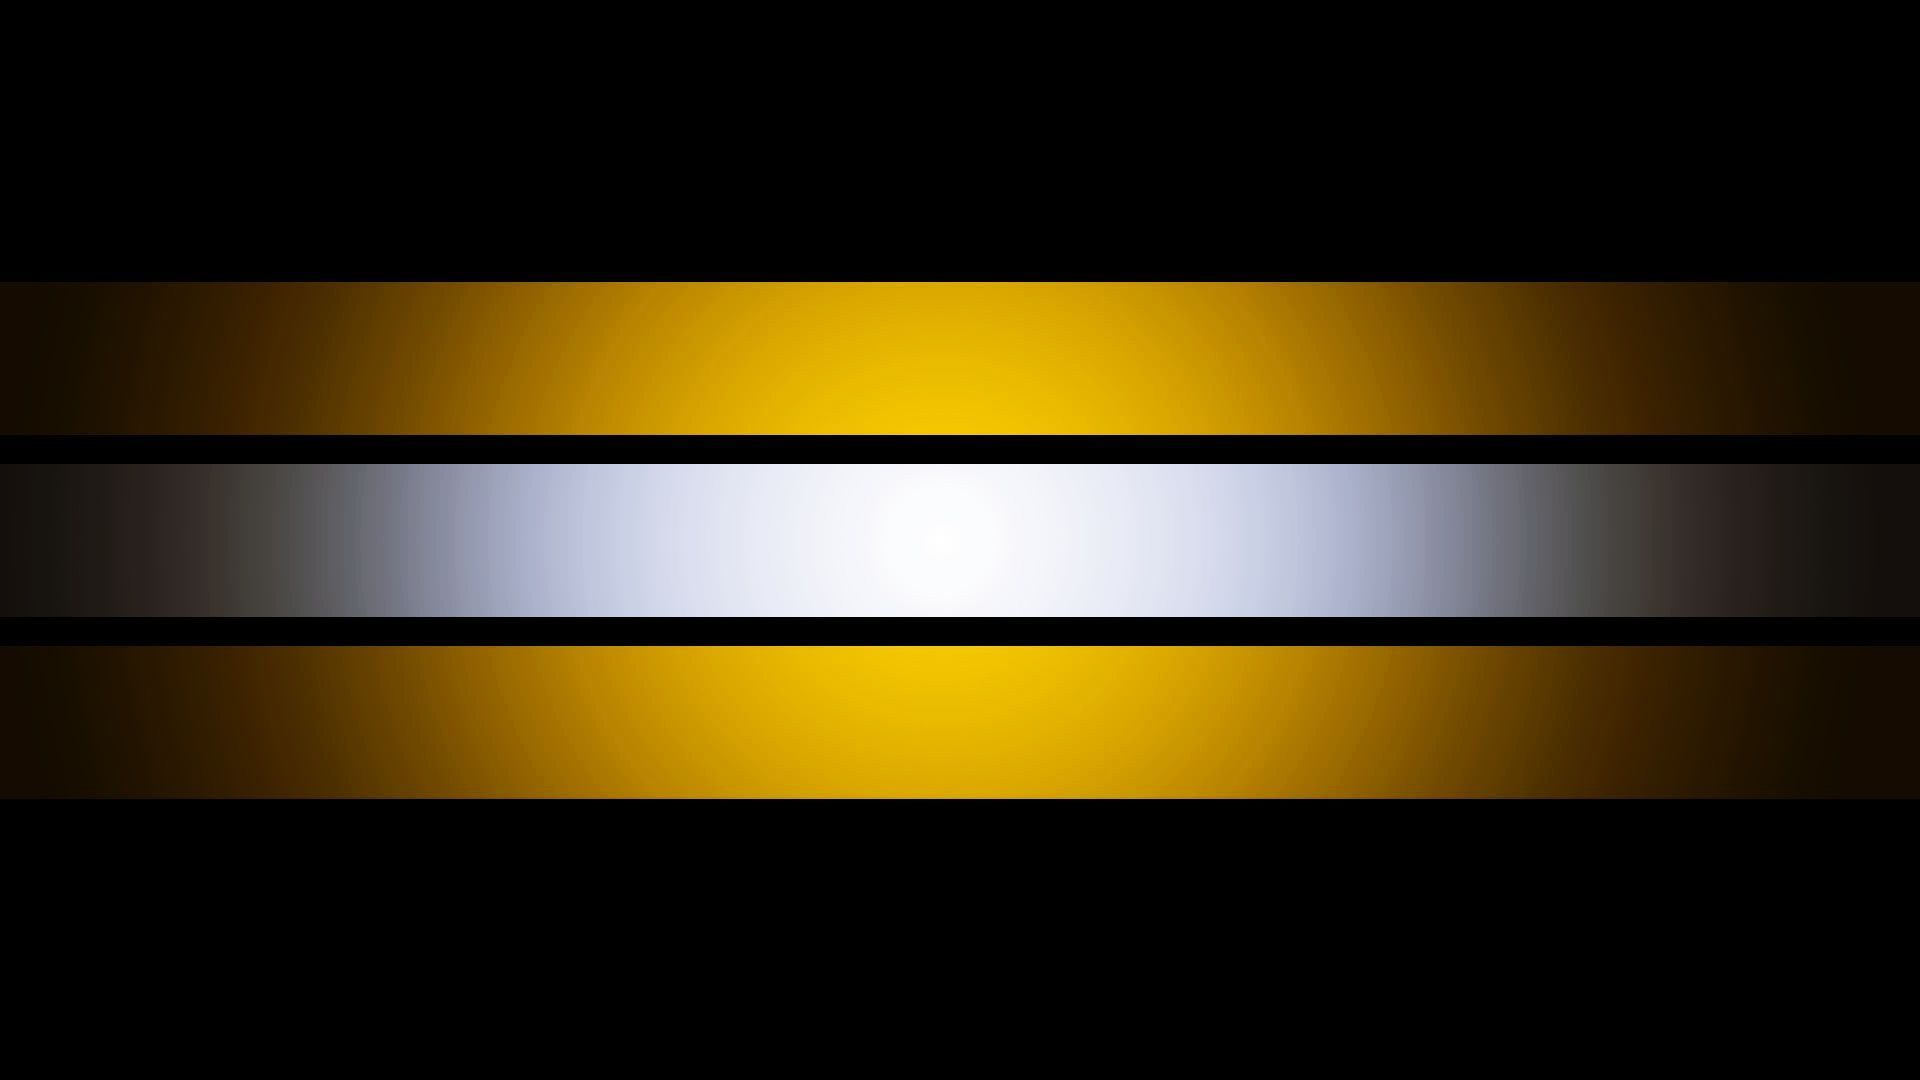 Watch more like Black And Yellow Abstract Wallpaper. White wallpaper, Black background wallpaper, Yellow background